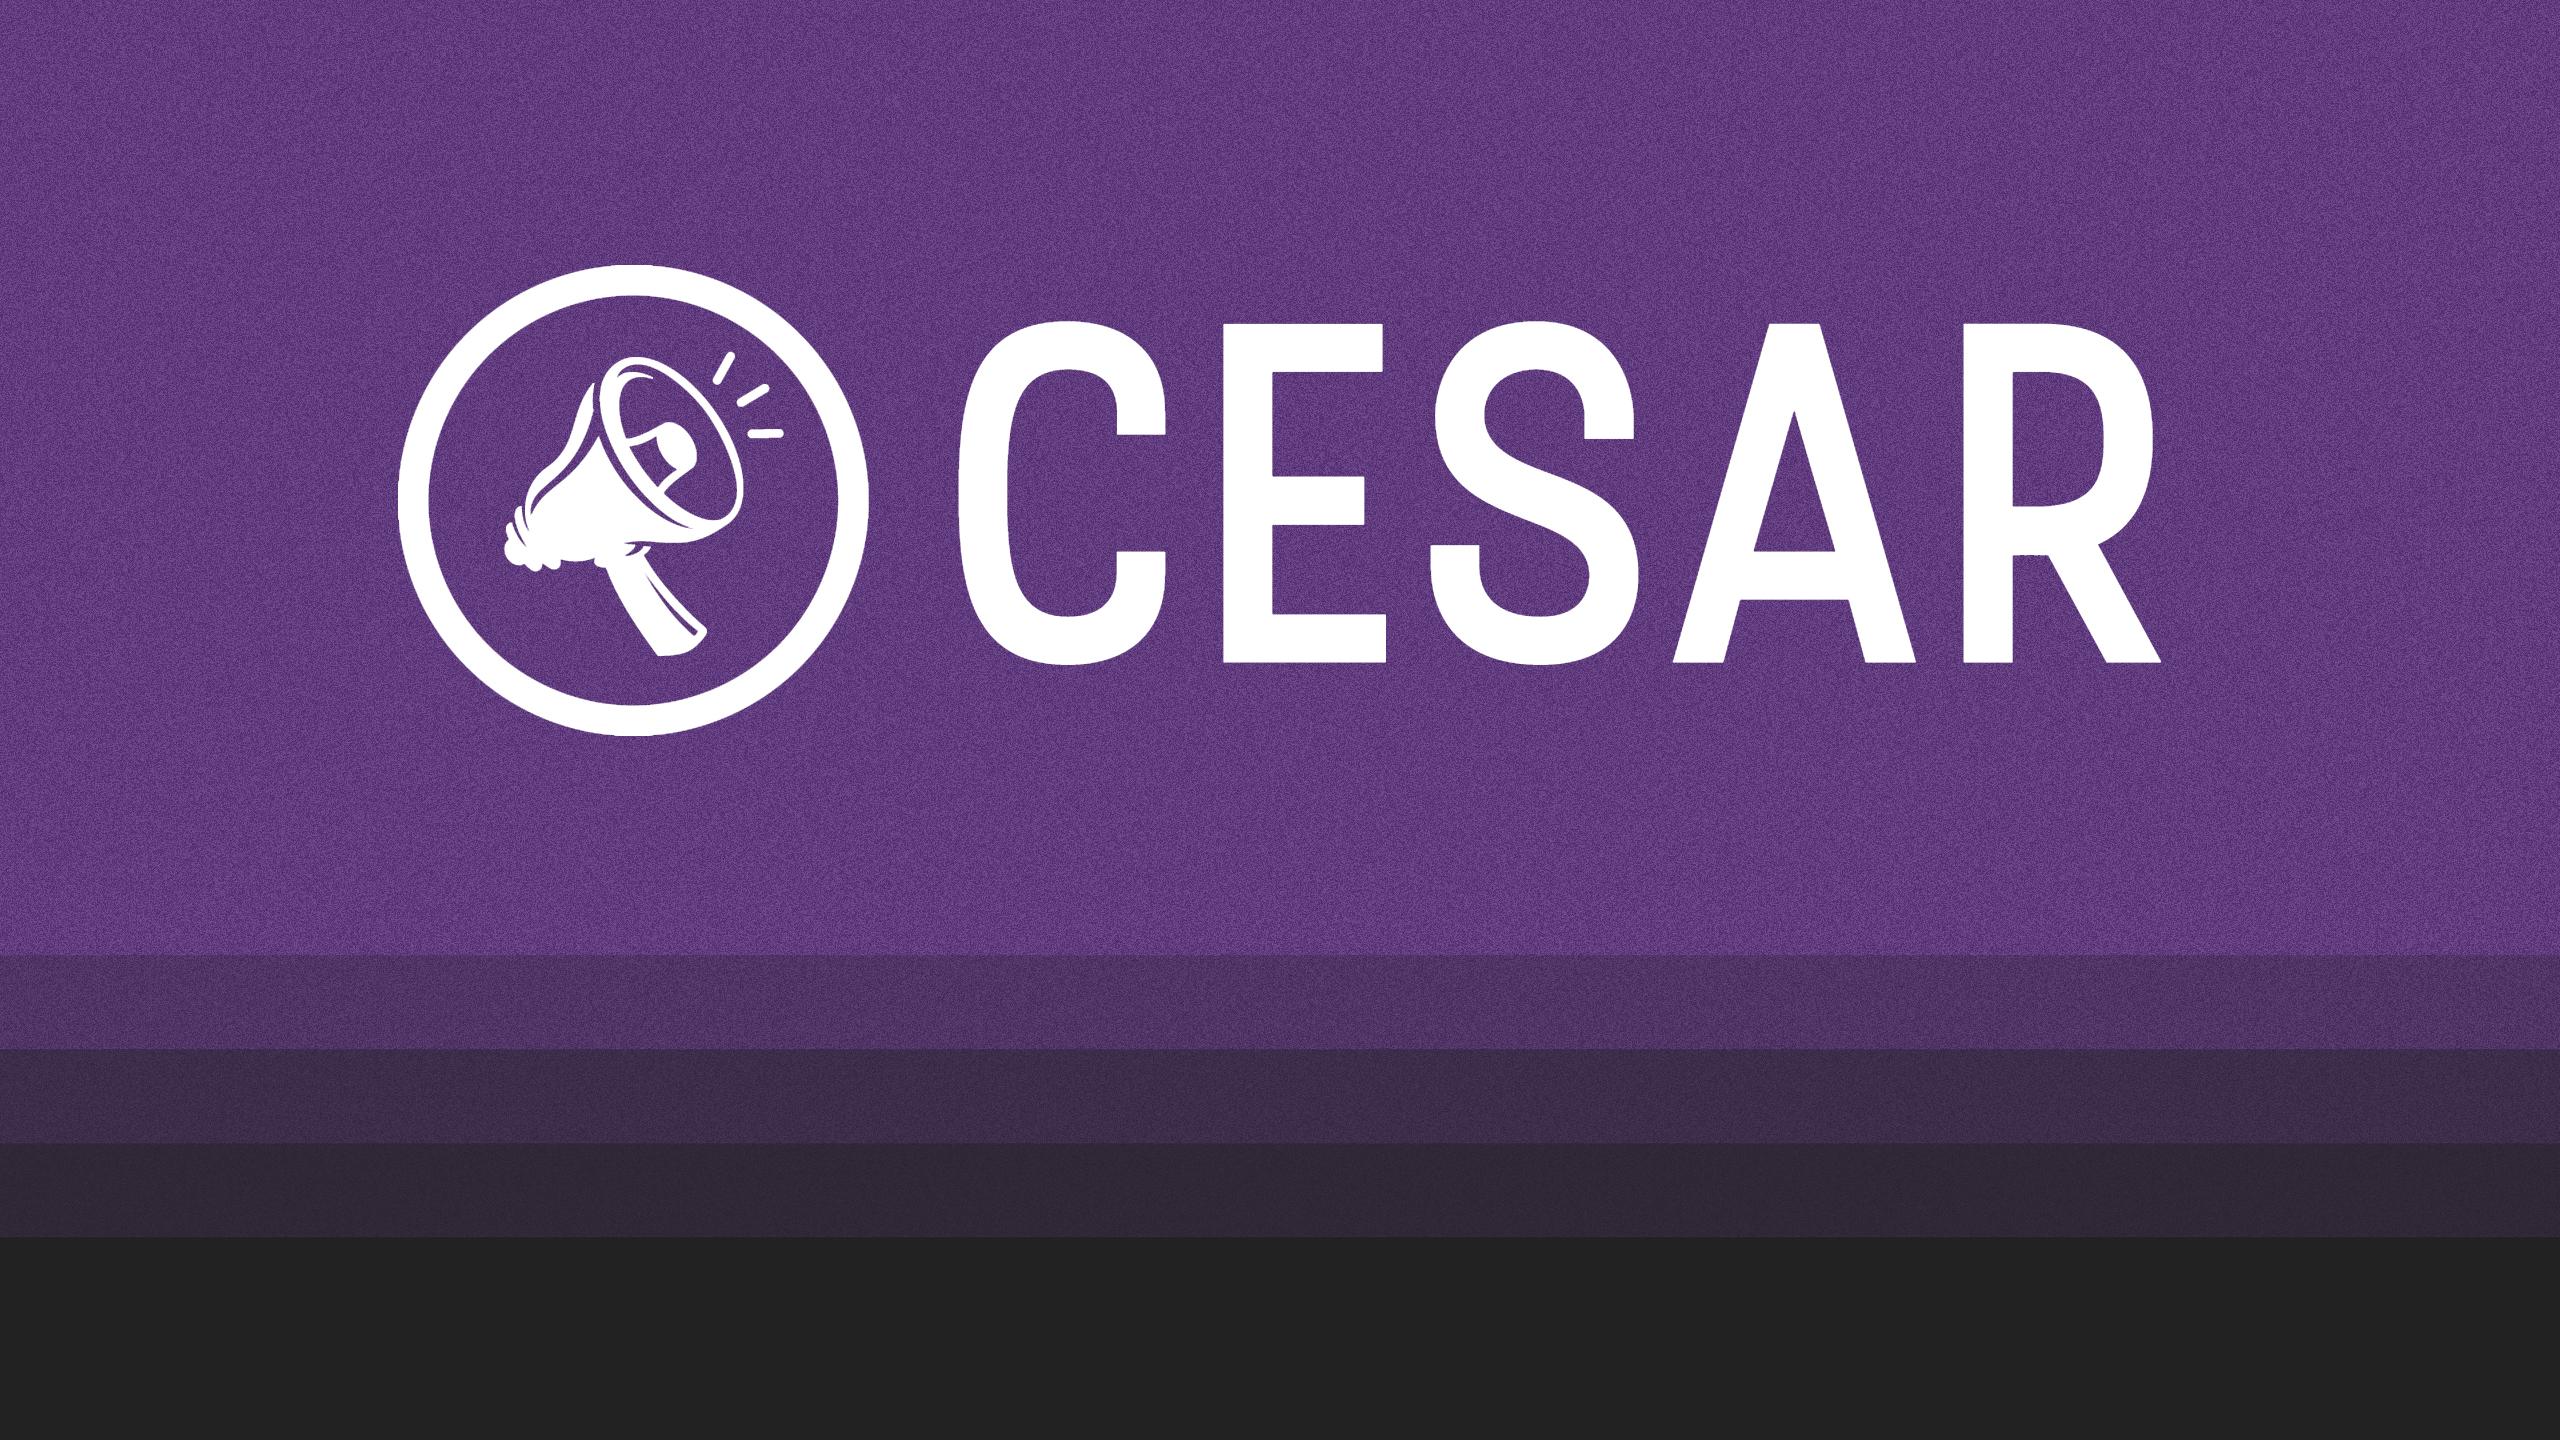 An illustration of the CESAR logo on a purple background